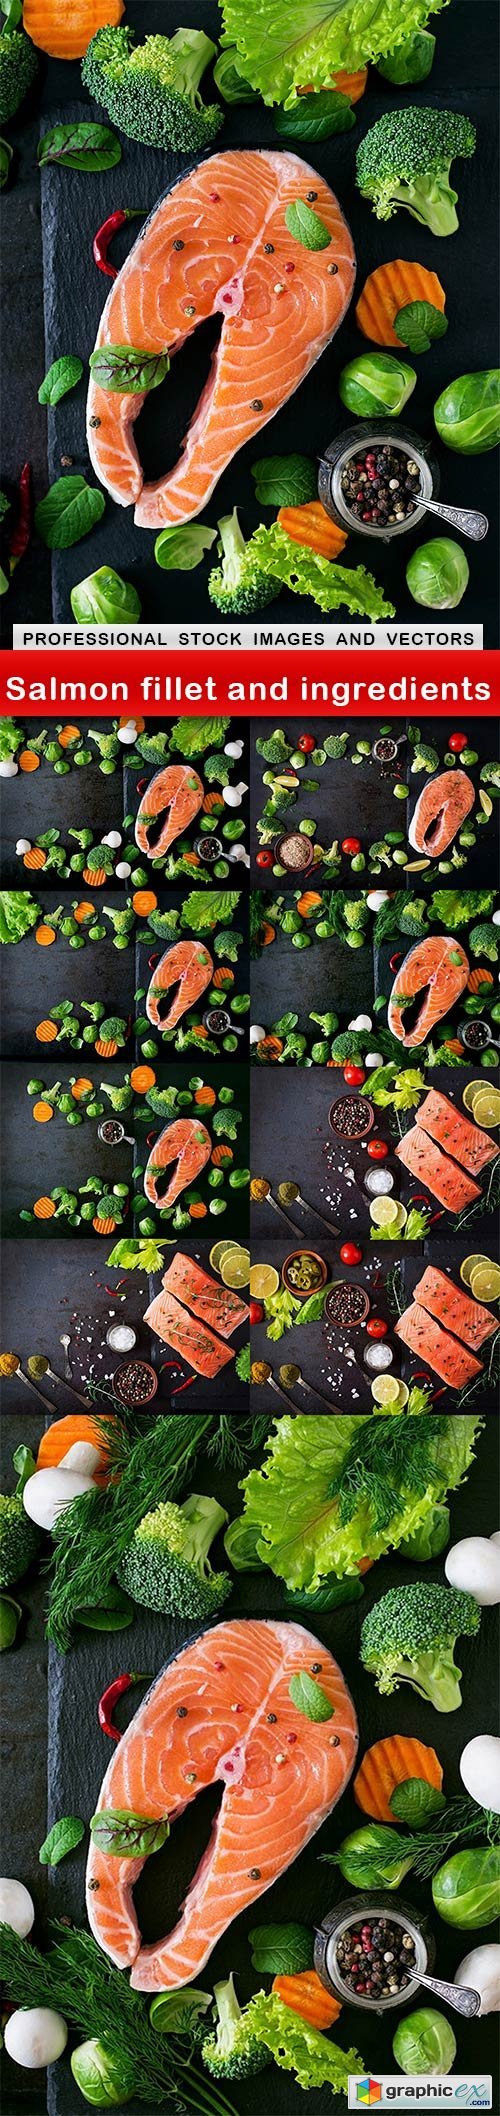 Salmon fillet and ingredients - 10 UHQ JPEG